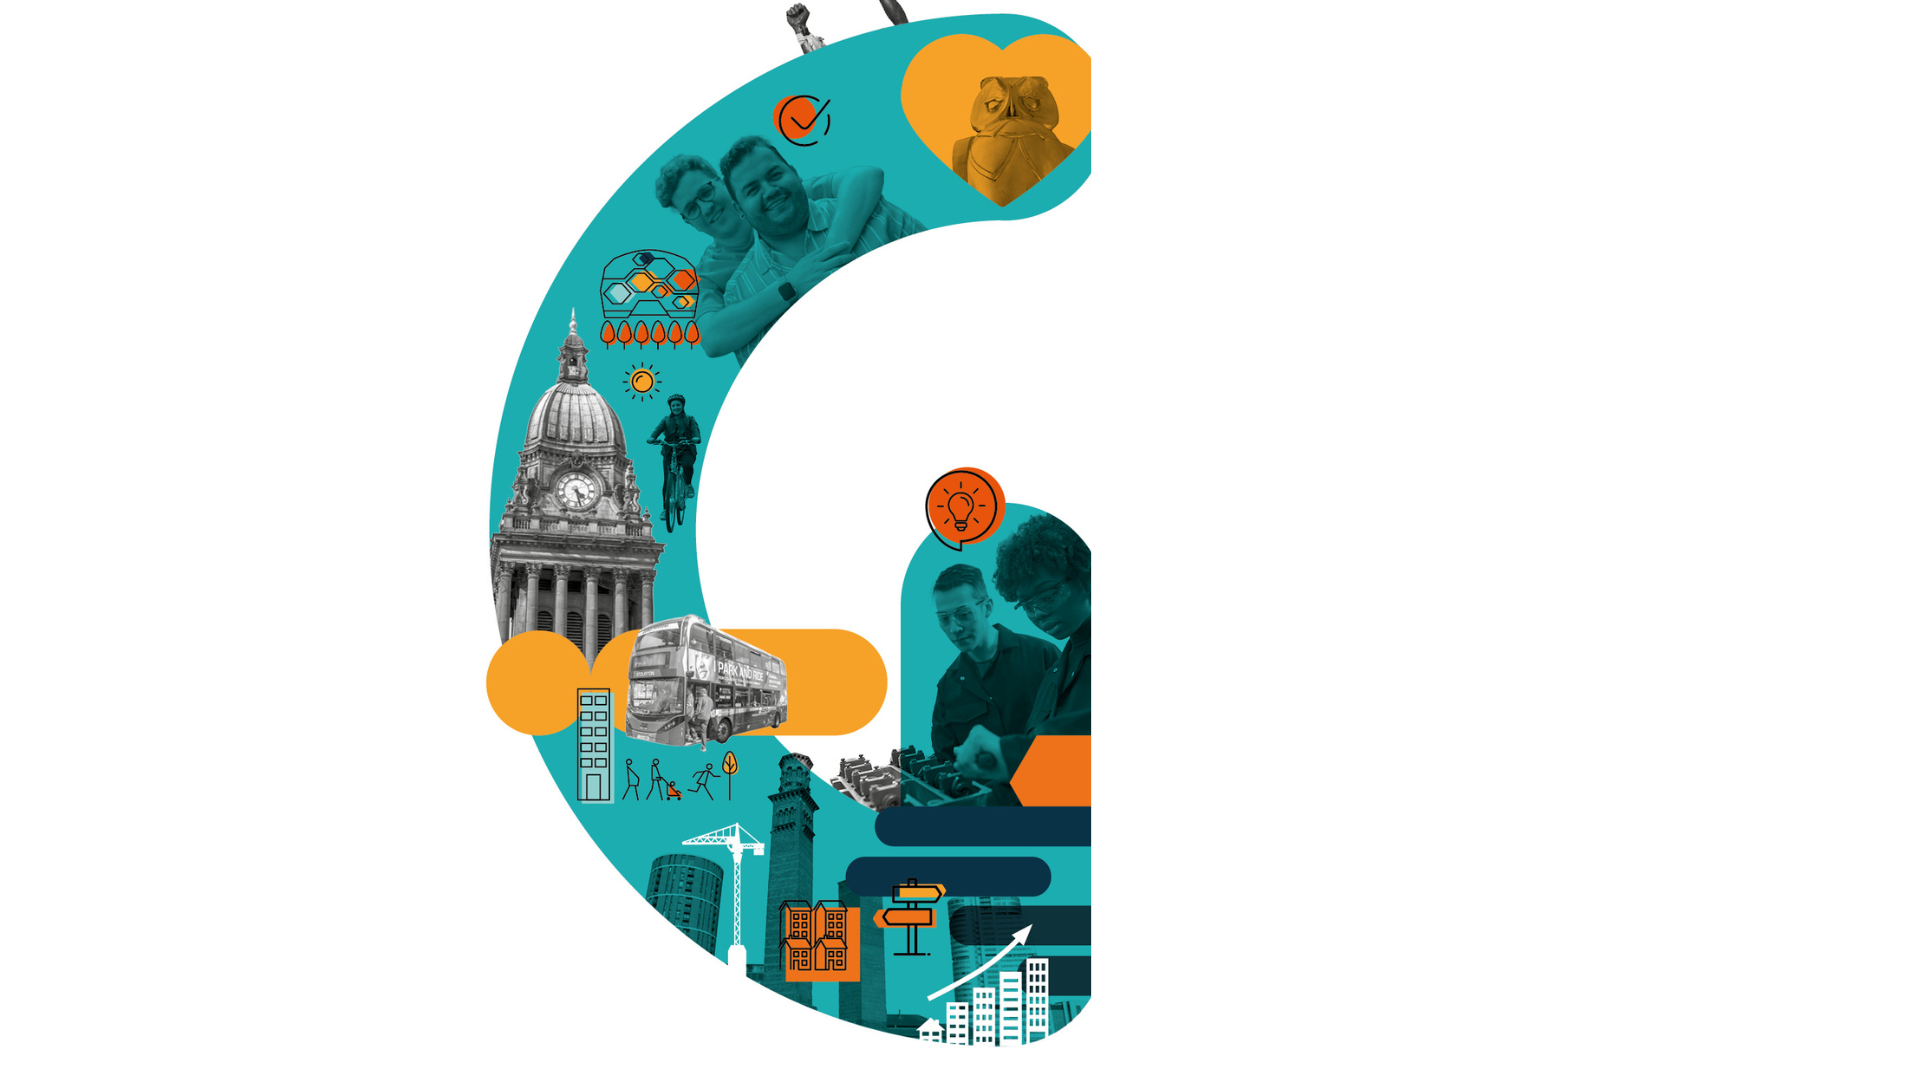 The letter G for Growth with infilled photos of a young women and man manufacturing as well as Leeds Town Hall, trains and buses and graphic elements representing growth in the city